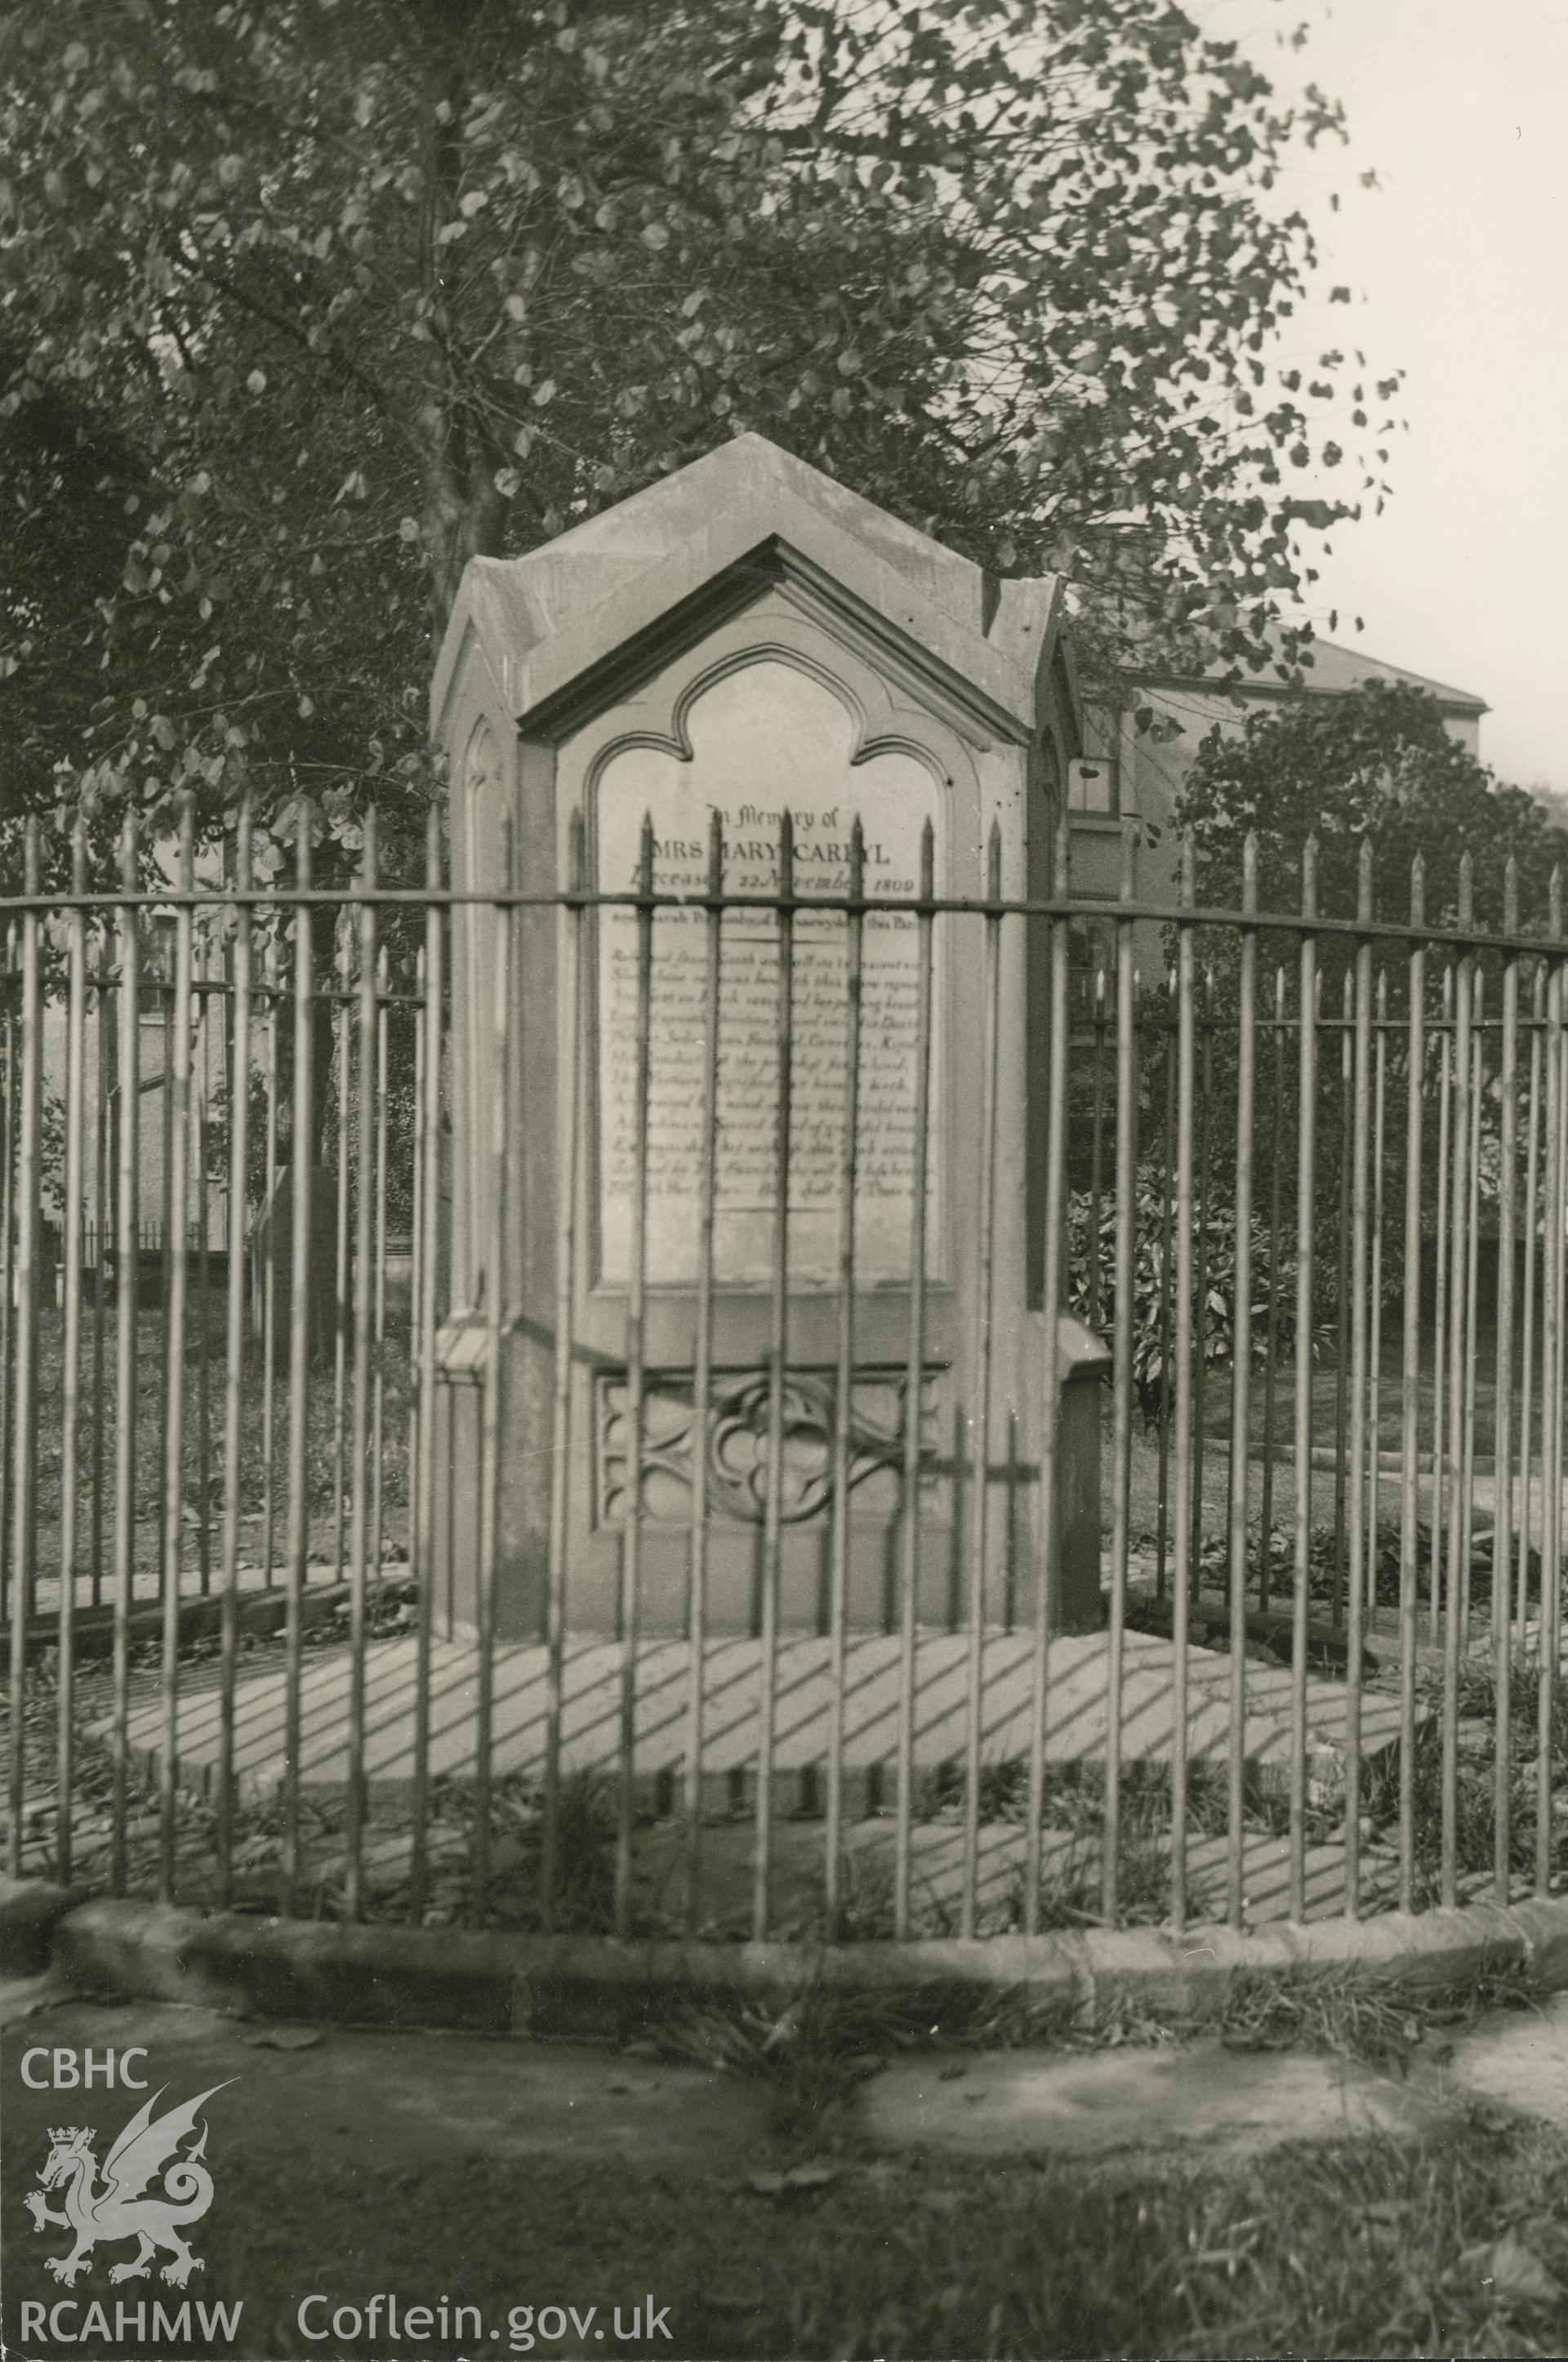 Digital copy of a black and white photo showing a monument in the churchyard at St Collen's Church, Llangollen.